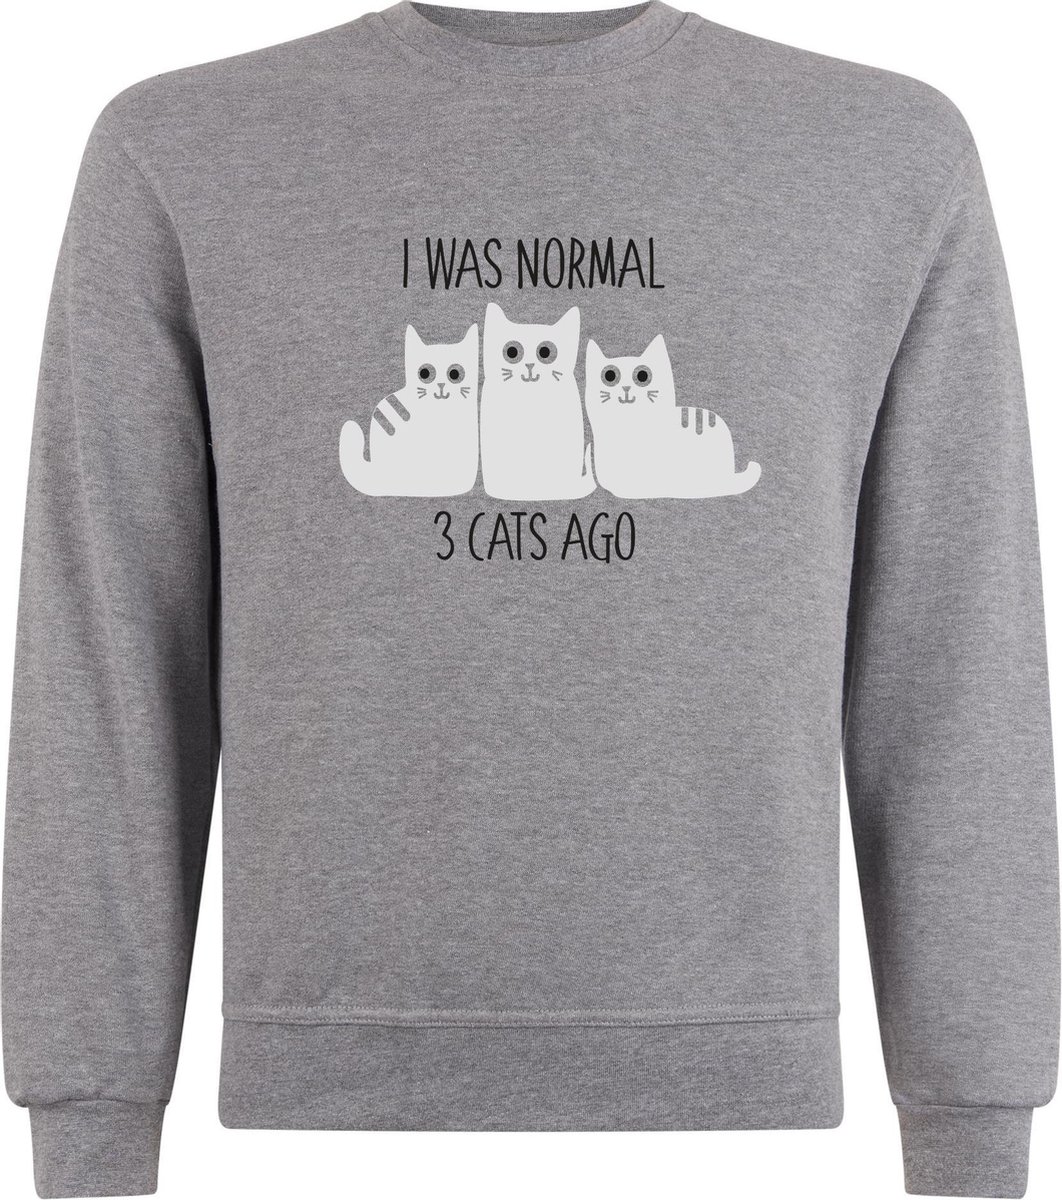 Sweater zonder capuchon - Jumper - Trui - Vest - Lifestyle sweater - Chill Sweater - Kat - Cat - I was normal 3 cats ago - S.Grey - S